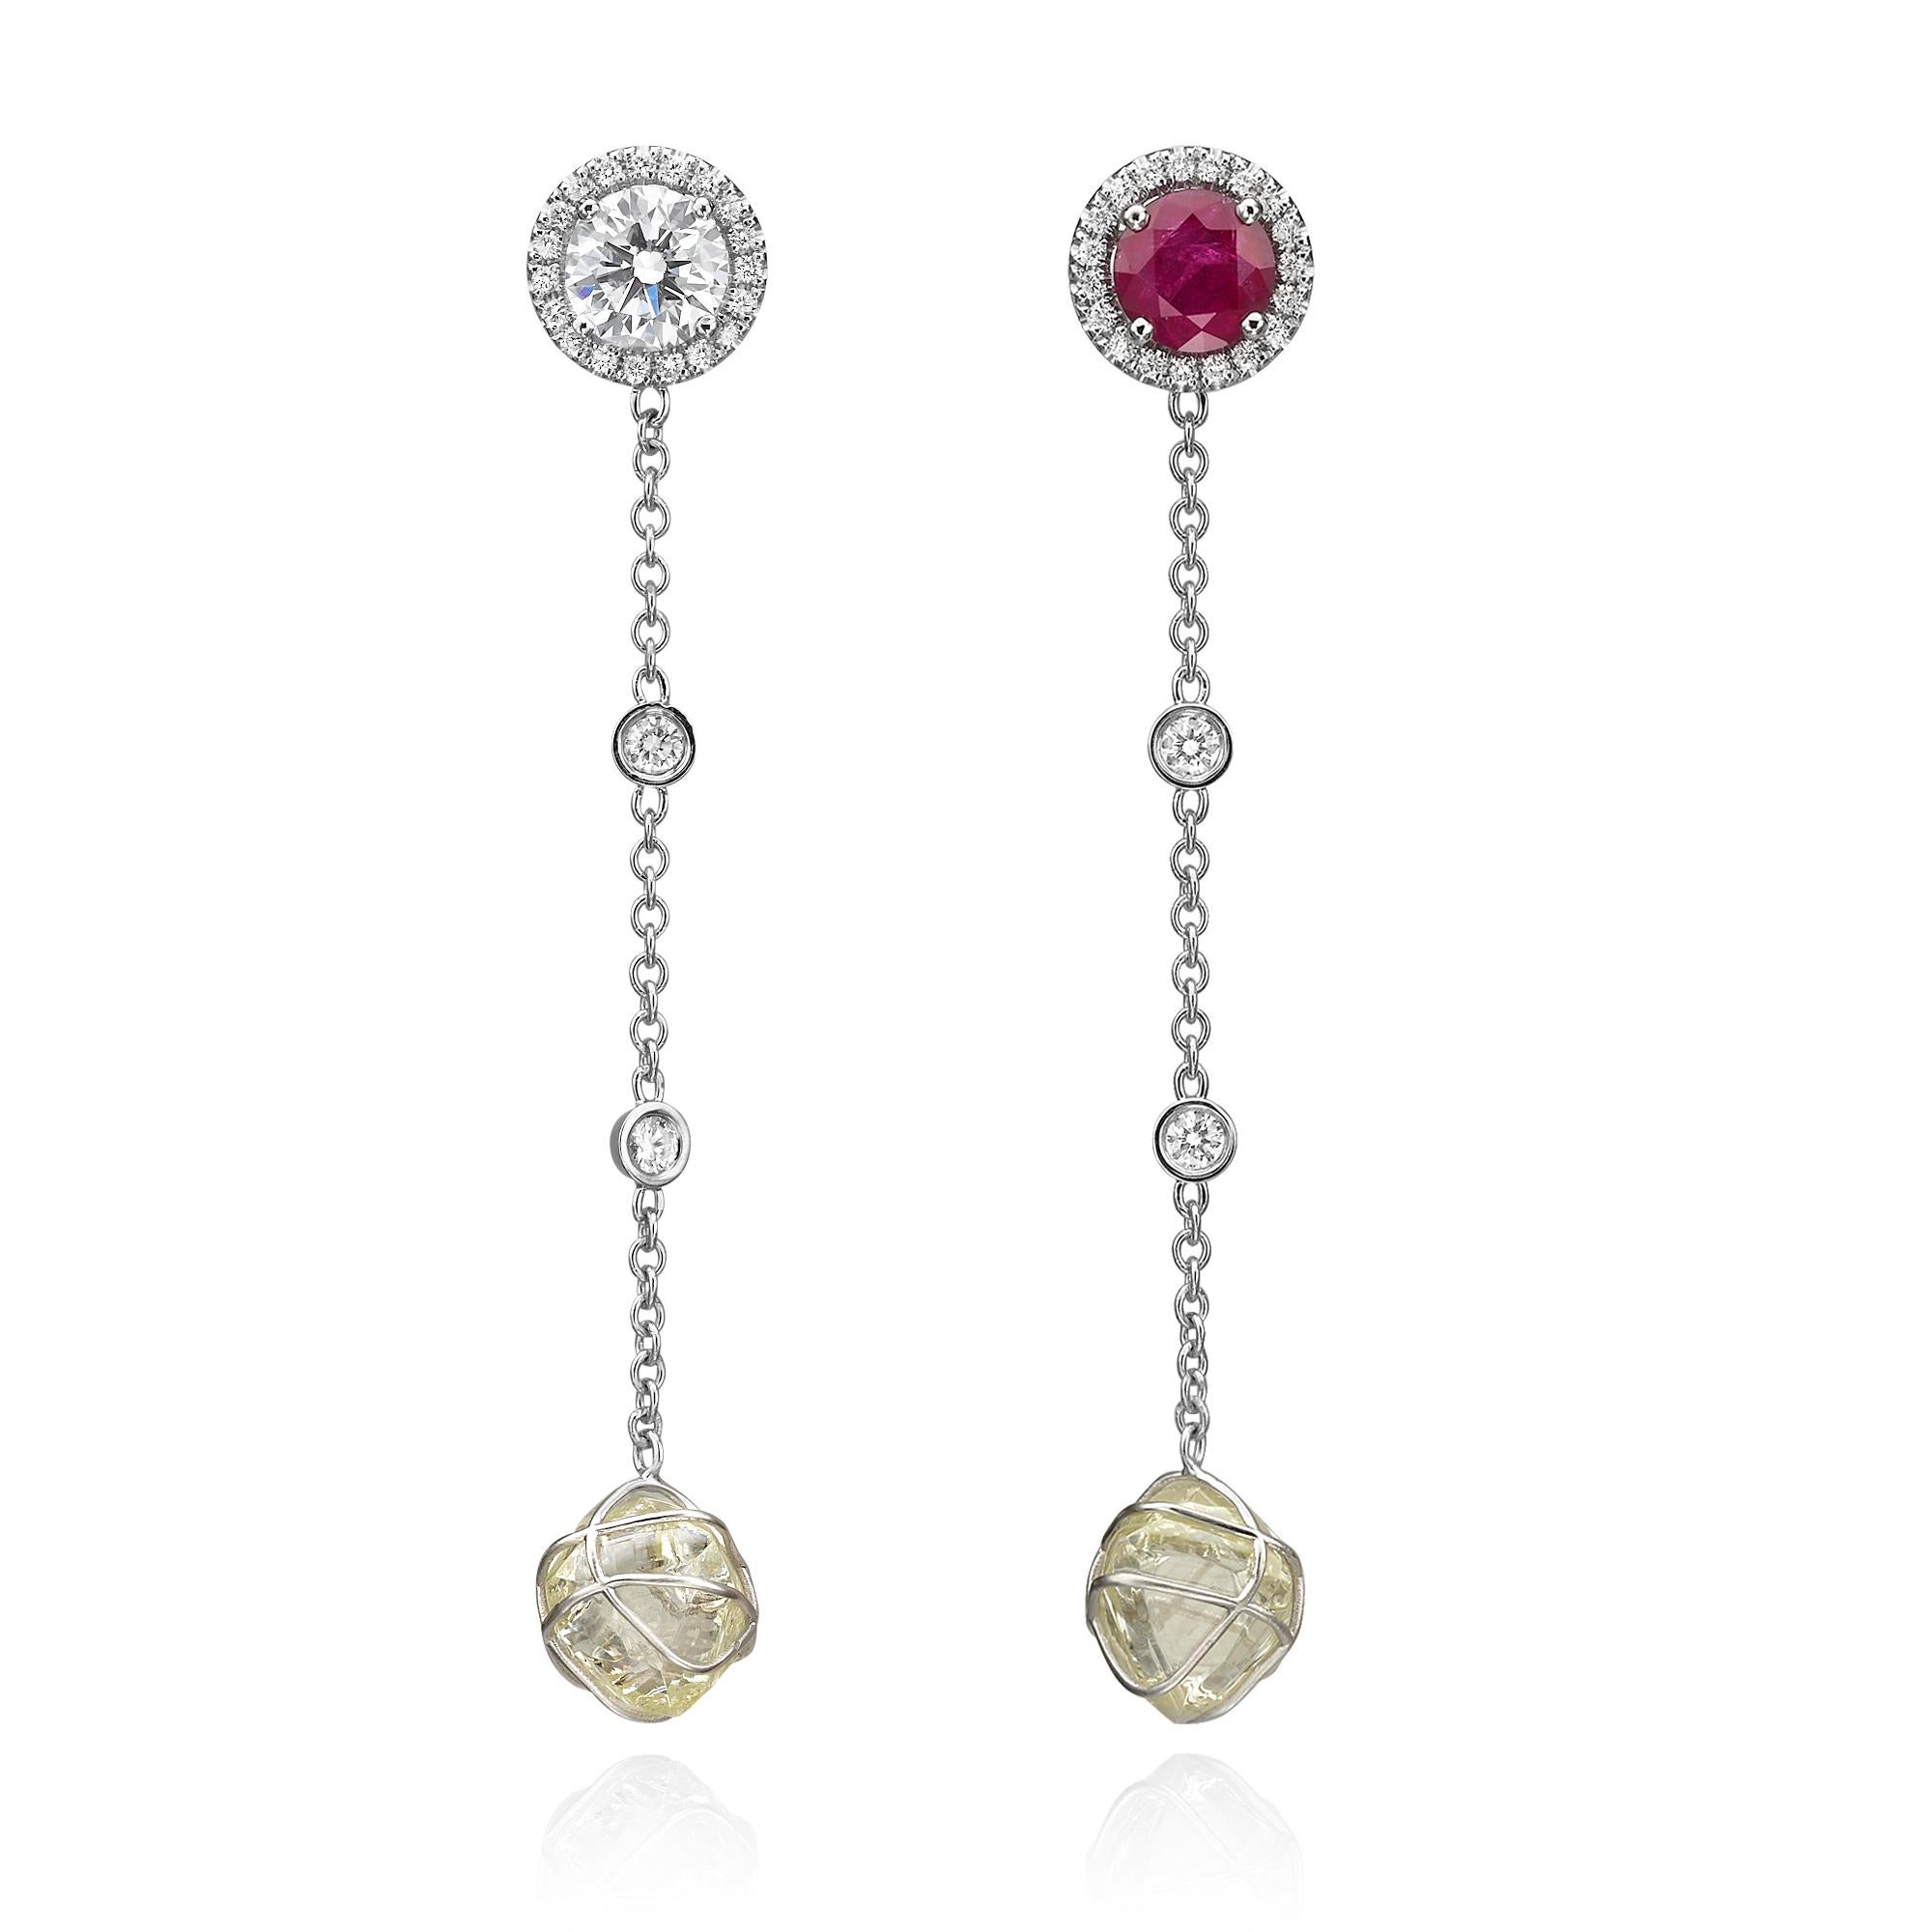 Contemporary GIA Certified 11.15 Carat Interchangeable Diamond and Ruby Dangling Earring Set For Sale